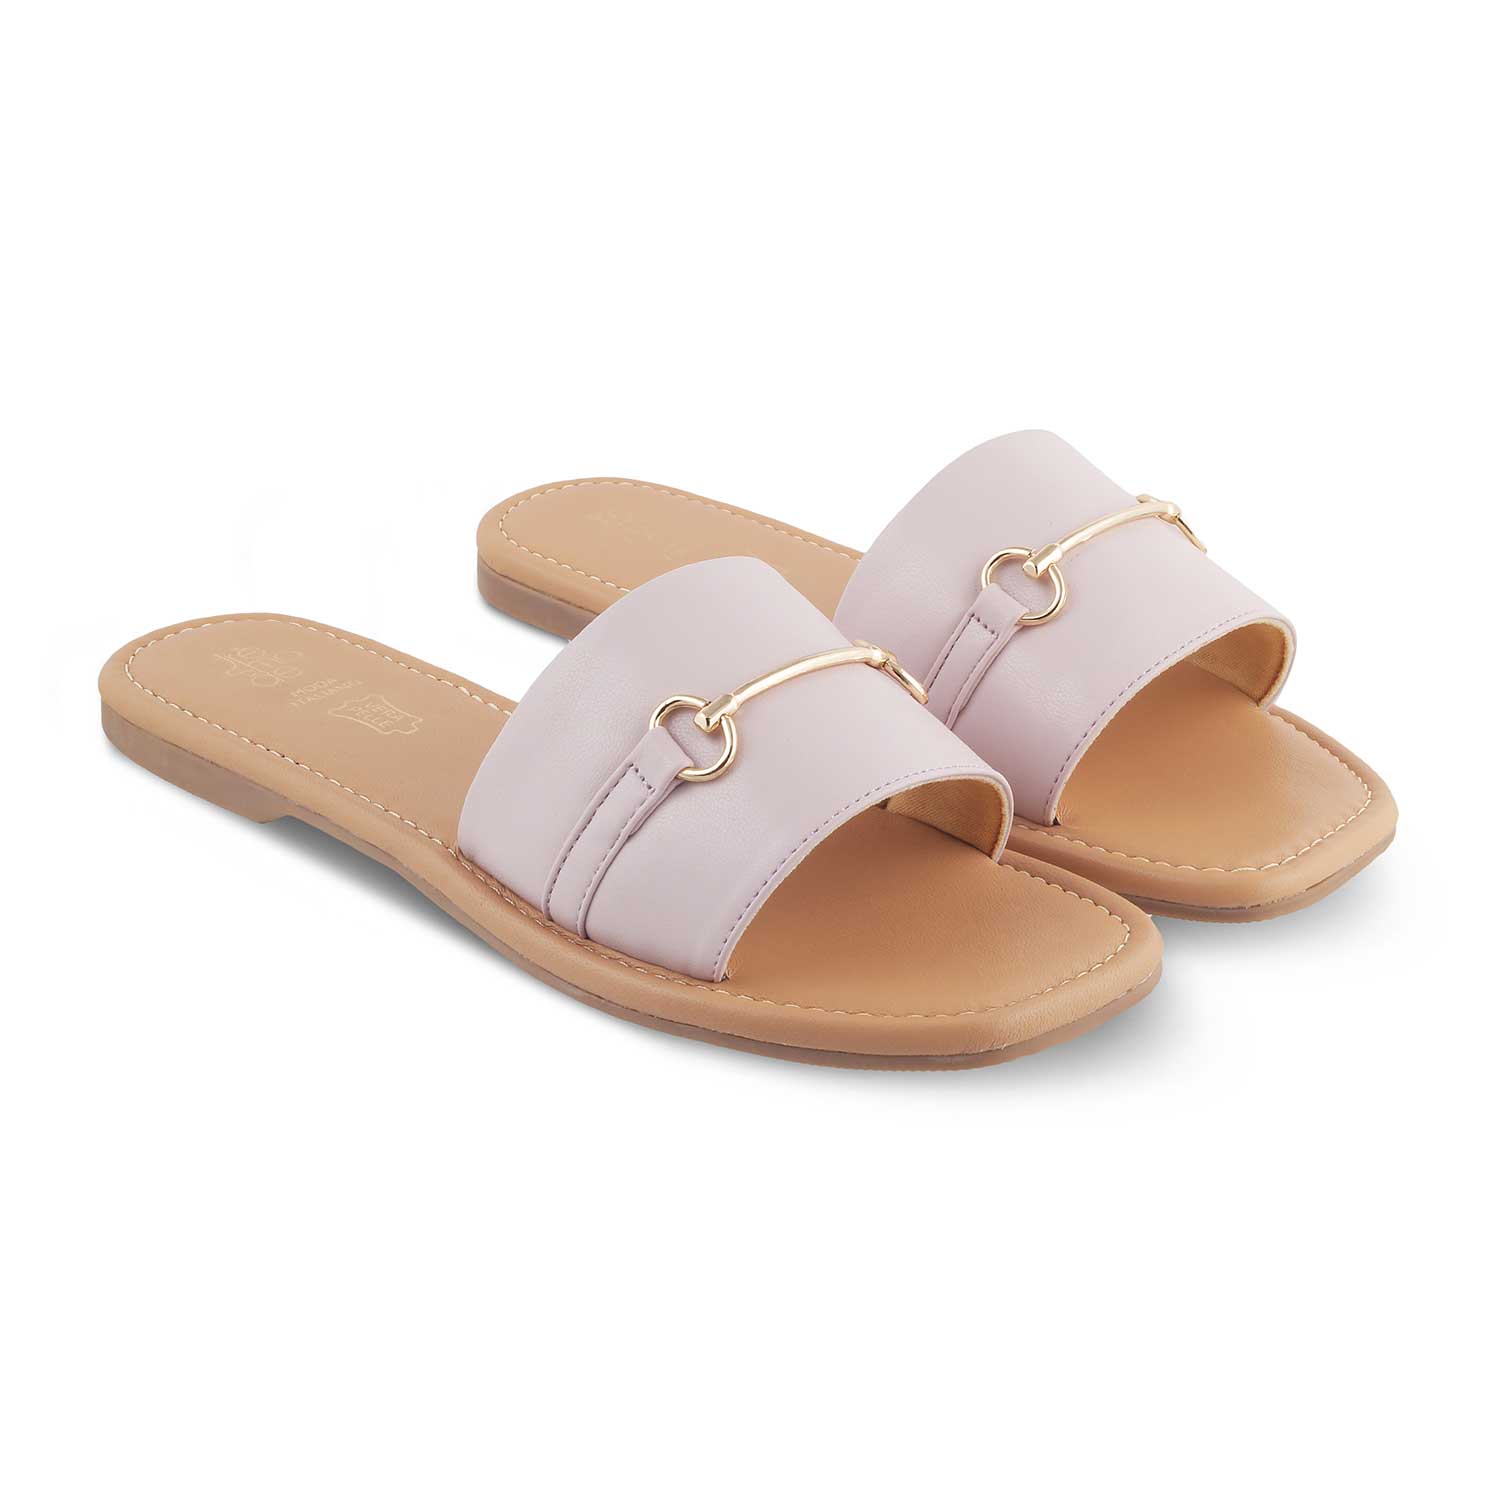 The Cafi Lilac Women's Casual Flats Tresmode - Tresmode